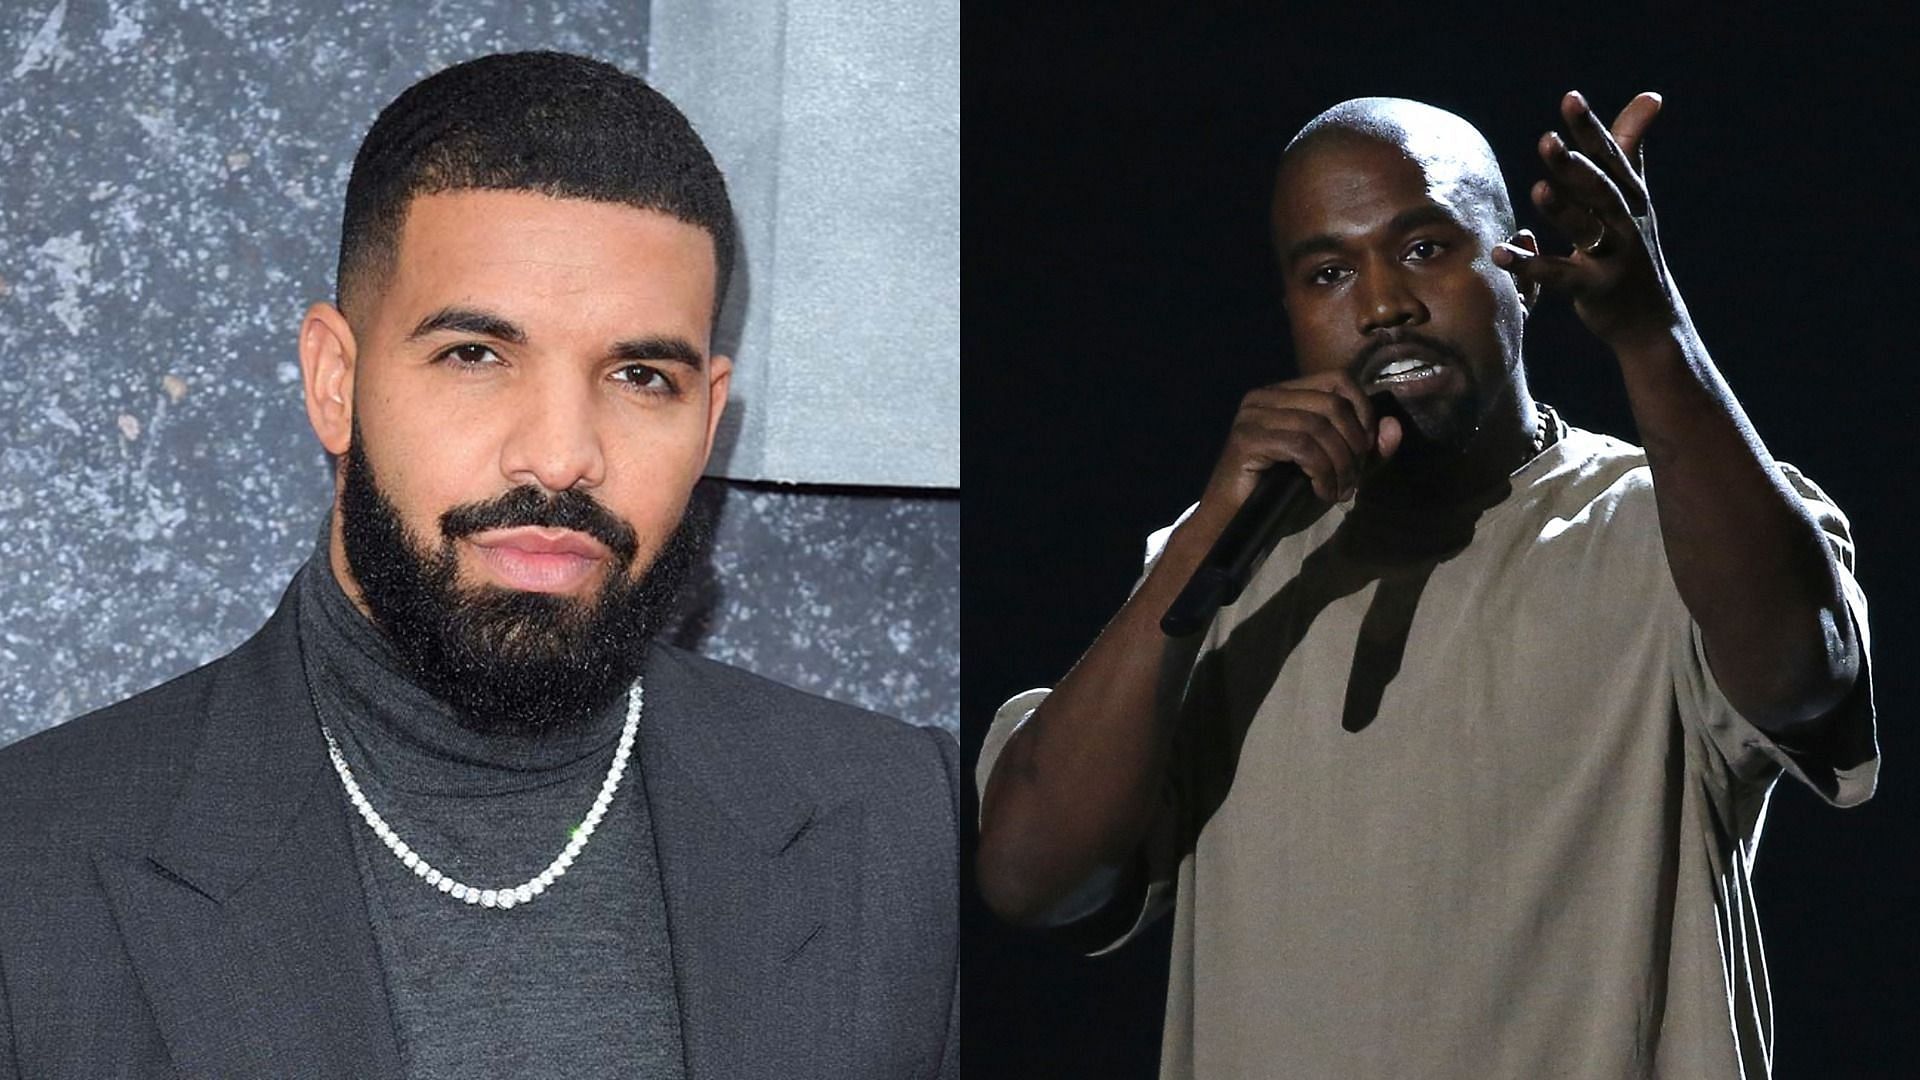 Drake and Kanye&#039;s beef began back in 2010 (Image via Getty Images)